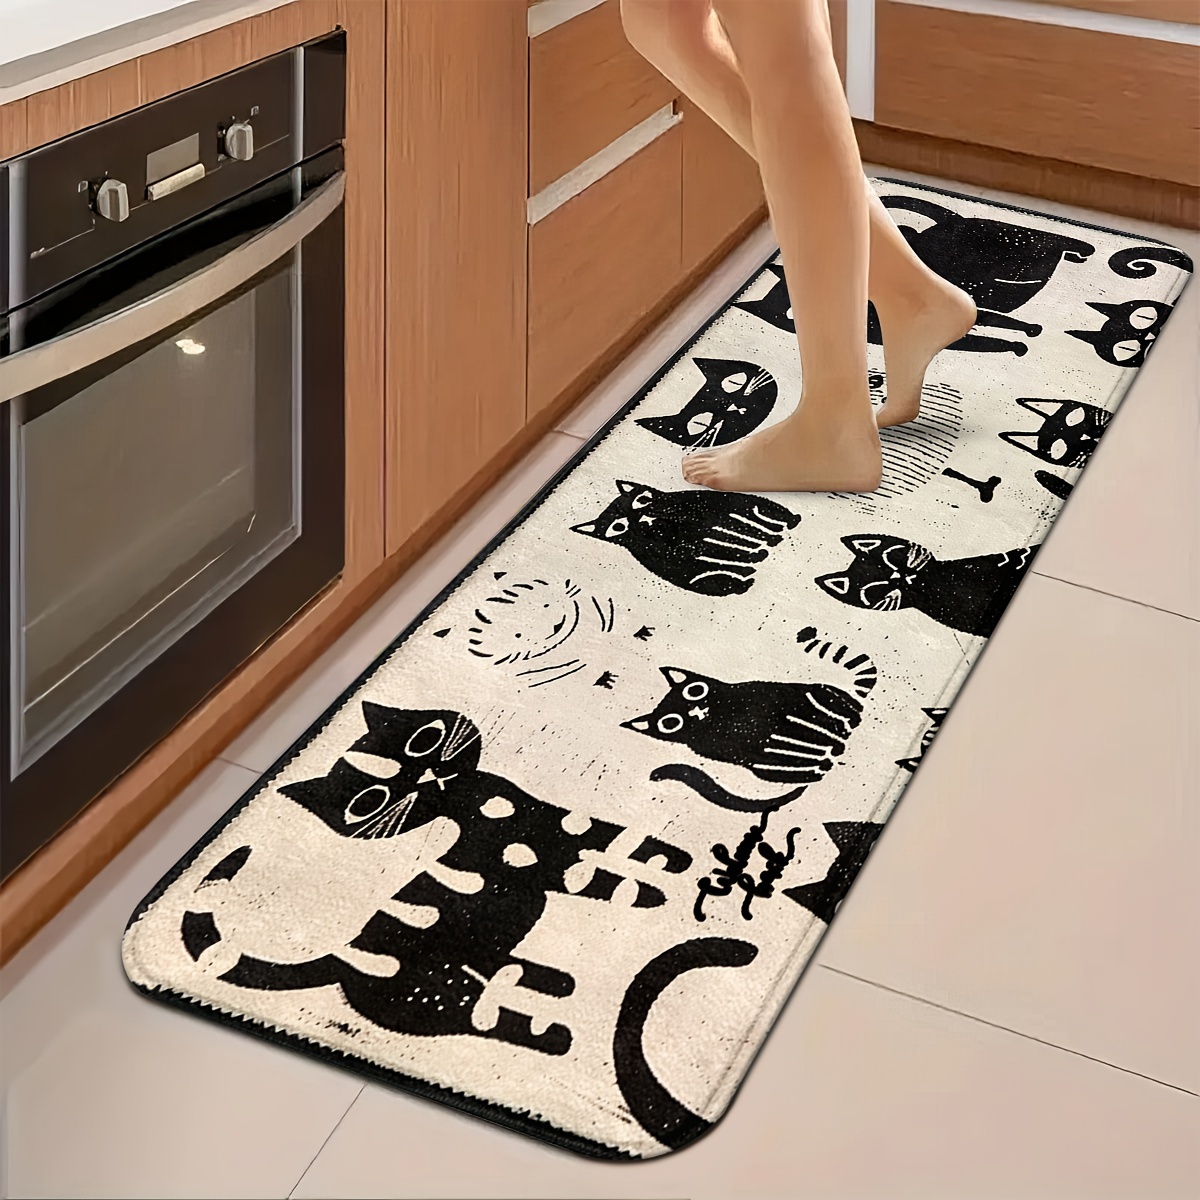 

Comic Cat Kitchen & Bathroom Mats - Non-slip, Durable, Machine Washable Runner Rugs For Home, Office, Laundry - Comfortable Polyester Carpets With Cute Cartoon Designs